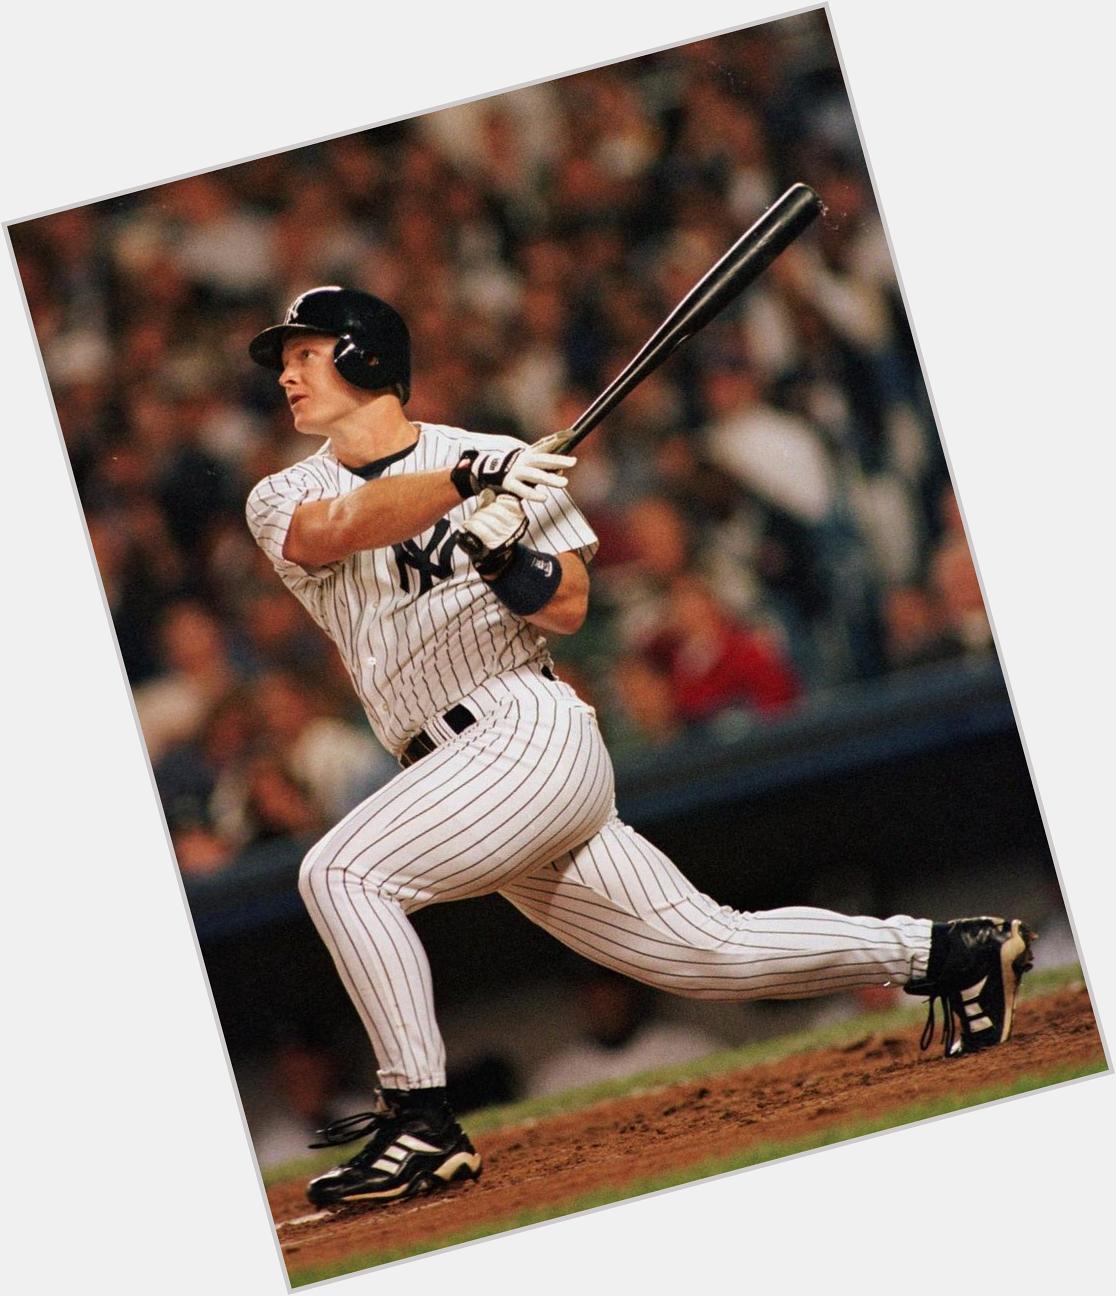 Happy Birthday to Shane Spencer, whose home run barage for the 1998 Yankees was the stuff of a Hollywood movie 